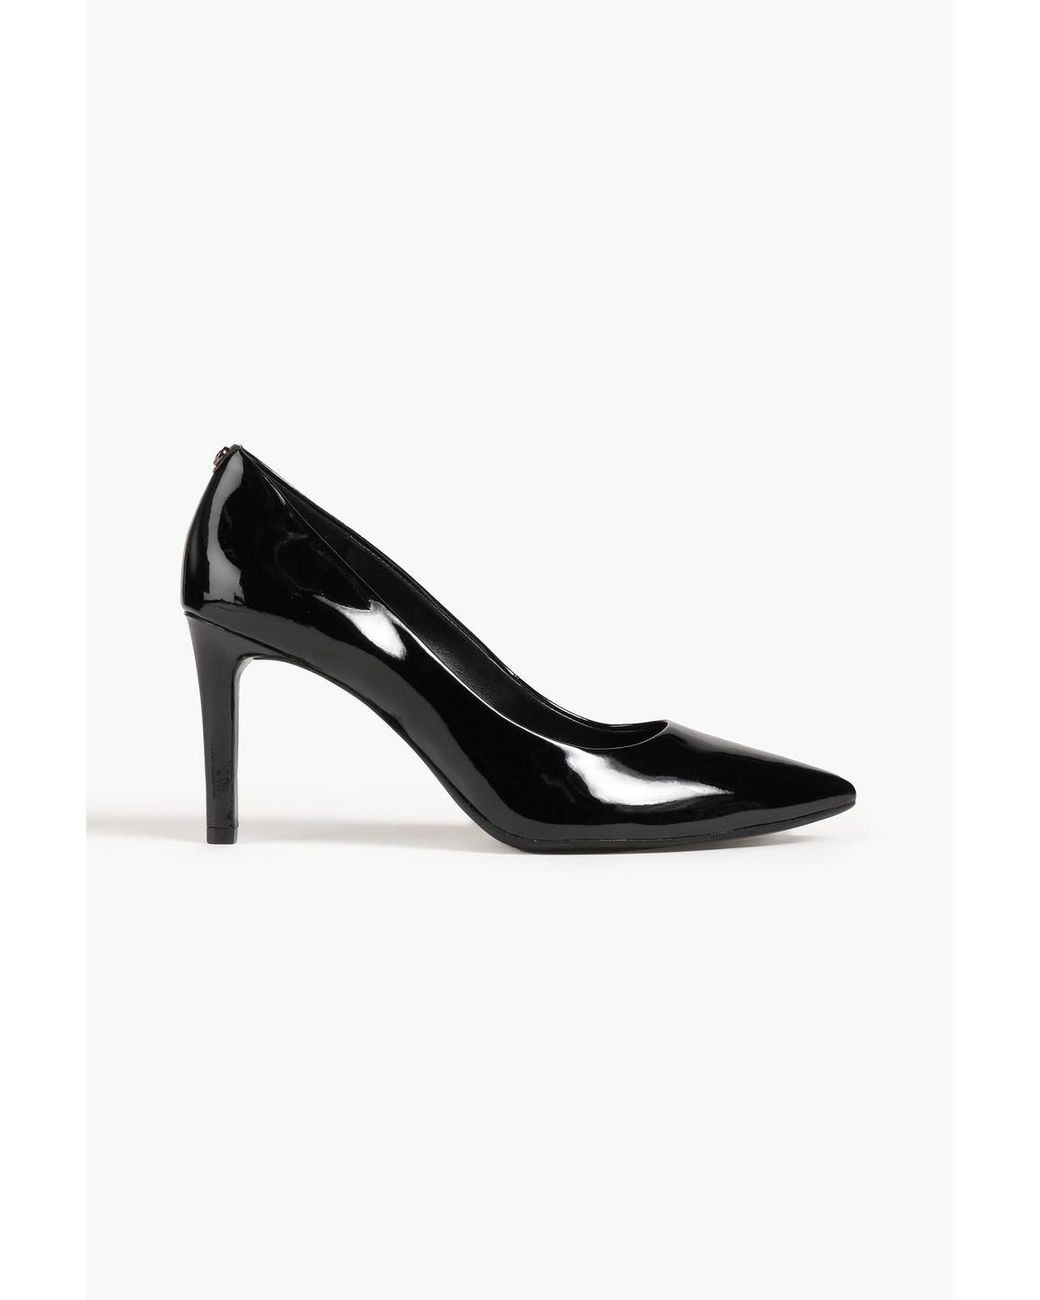 MICHAEL Michael Kors Angie Patent-leather Pumps in Black | Lyst Canada